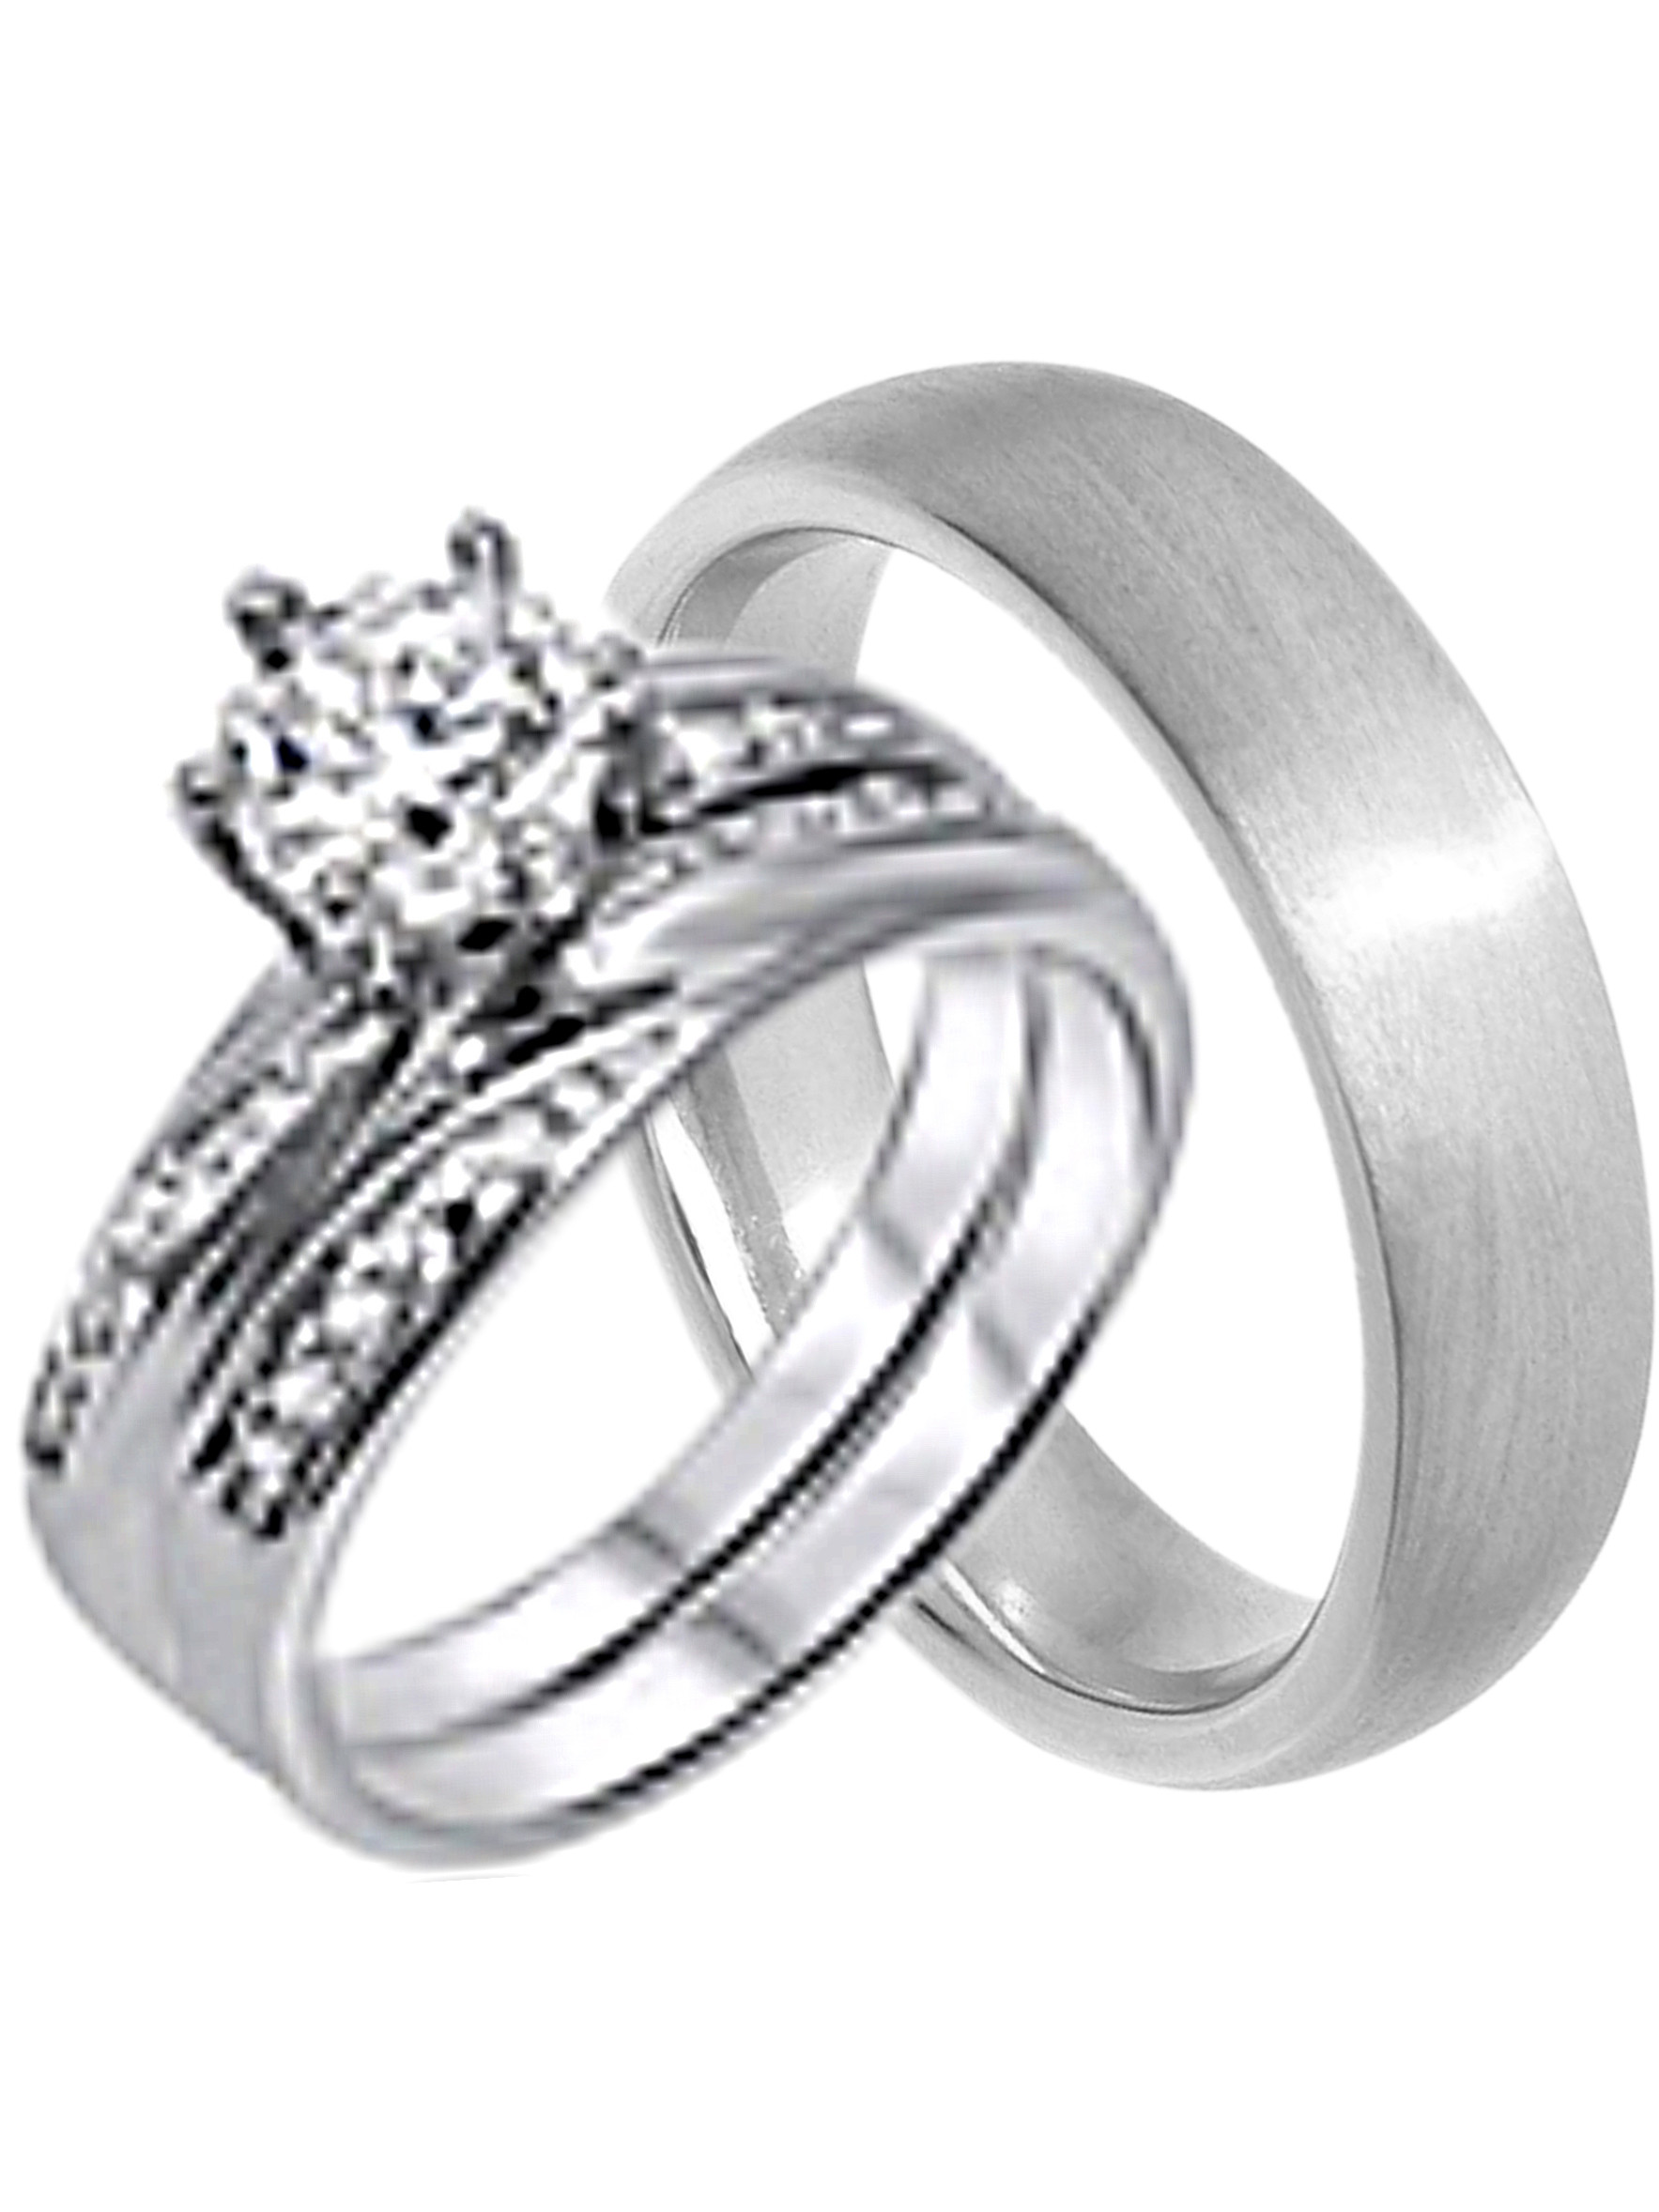 Cheap Wedding Rings For Him
 His and Hers Wedding Ring Set Cheap Wedding Bands for Him